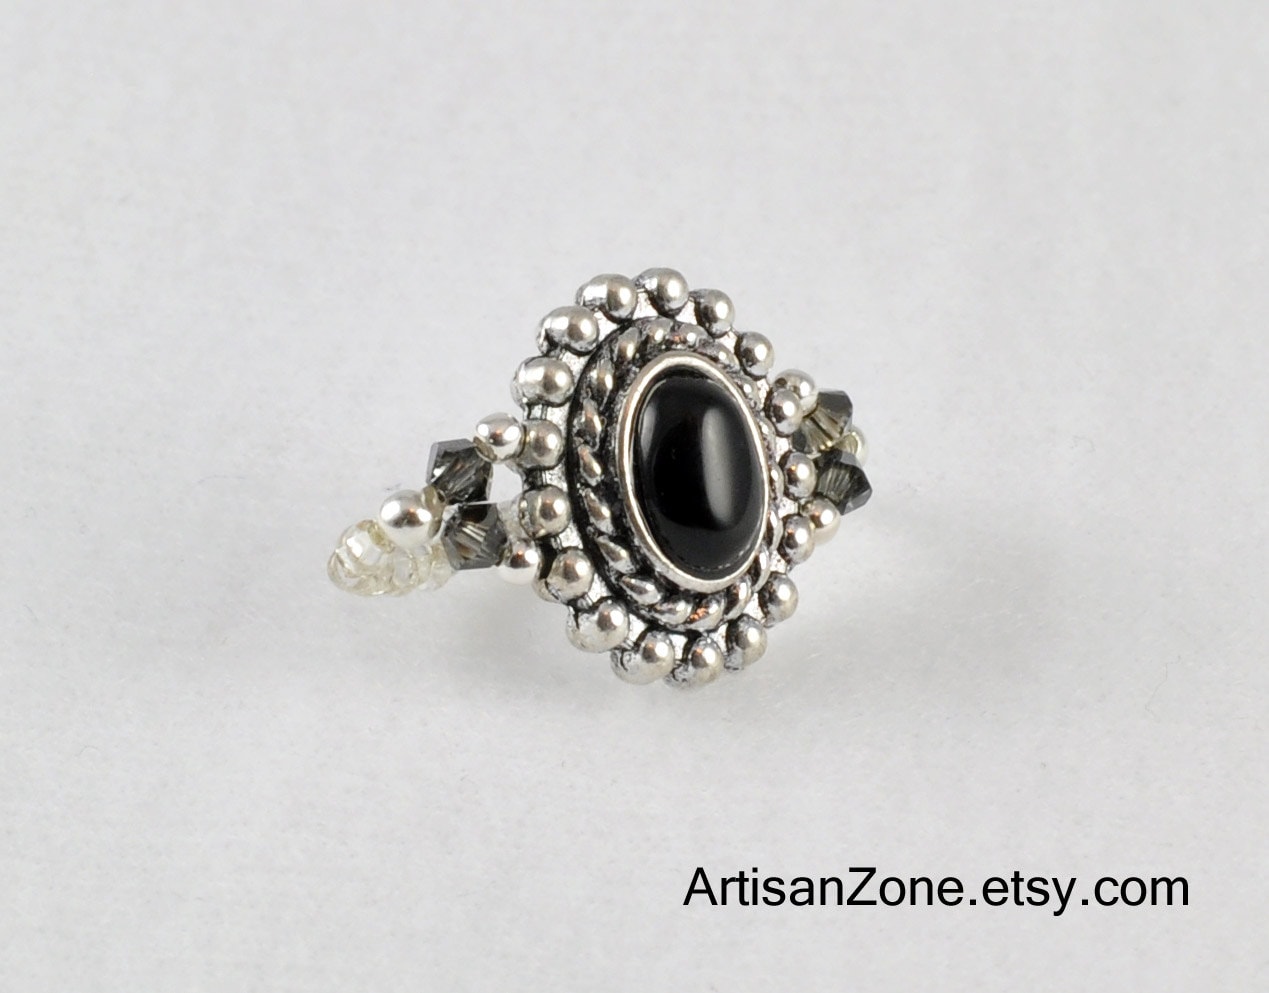 Vintage Look Black and Silver Stretch Fun Ring